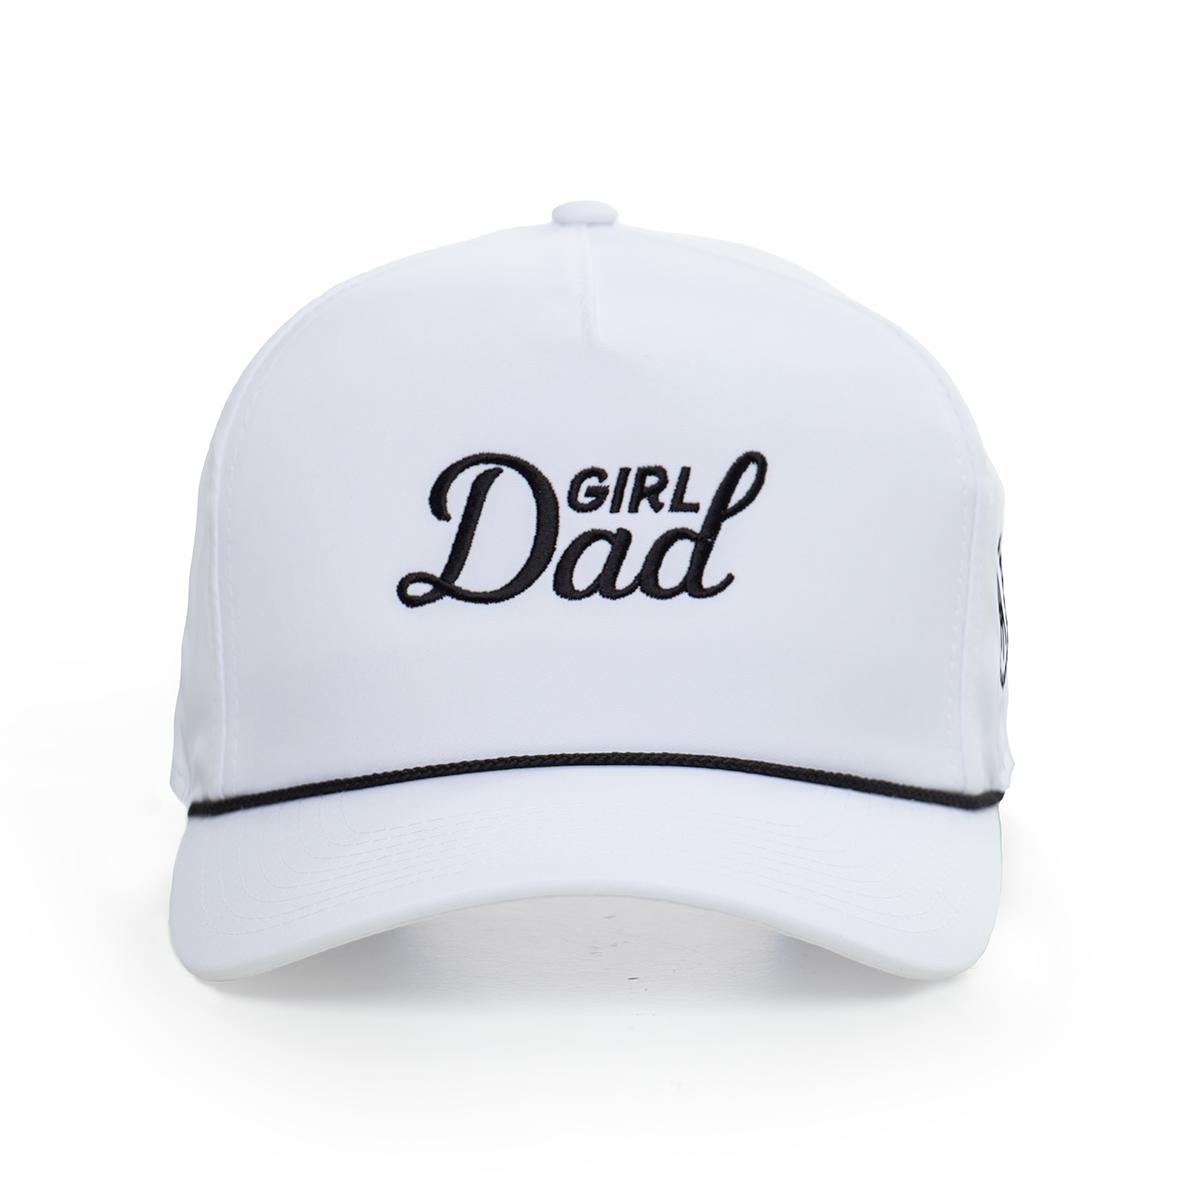 Girl Dad Imperial Rope Hat-Hats-Bussin With The Boys-White/Black-One Size-Barstool Sports